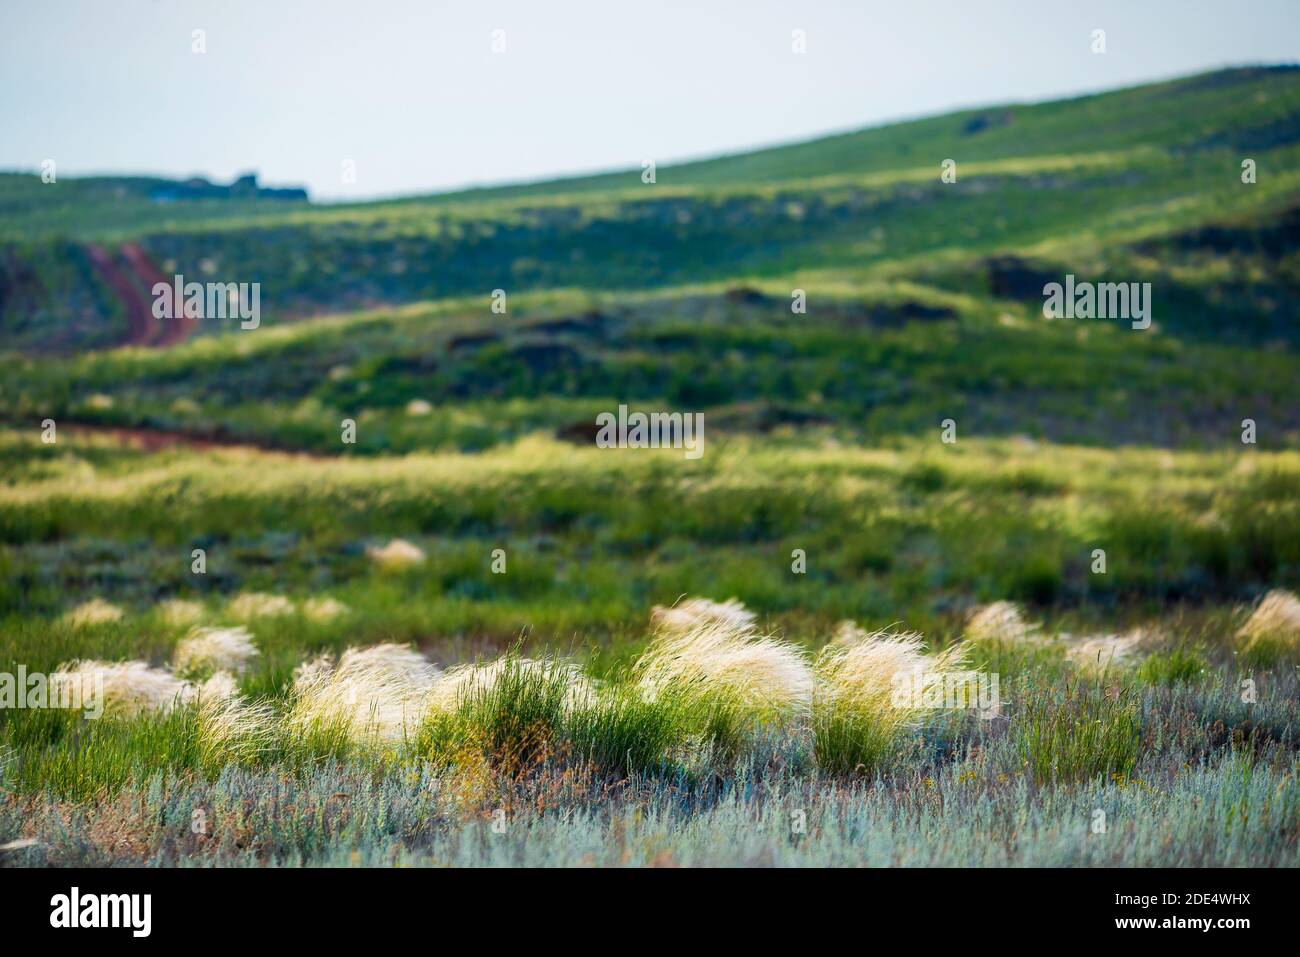 Blooming feather grass, fluttering in the wind on the plain between the hills. Stock Photo